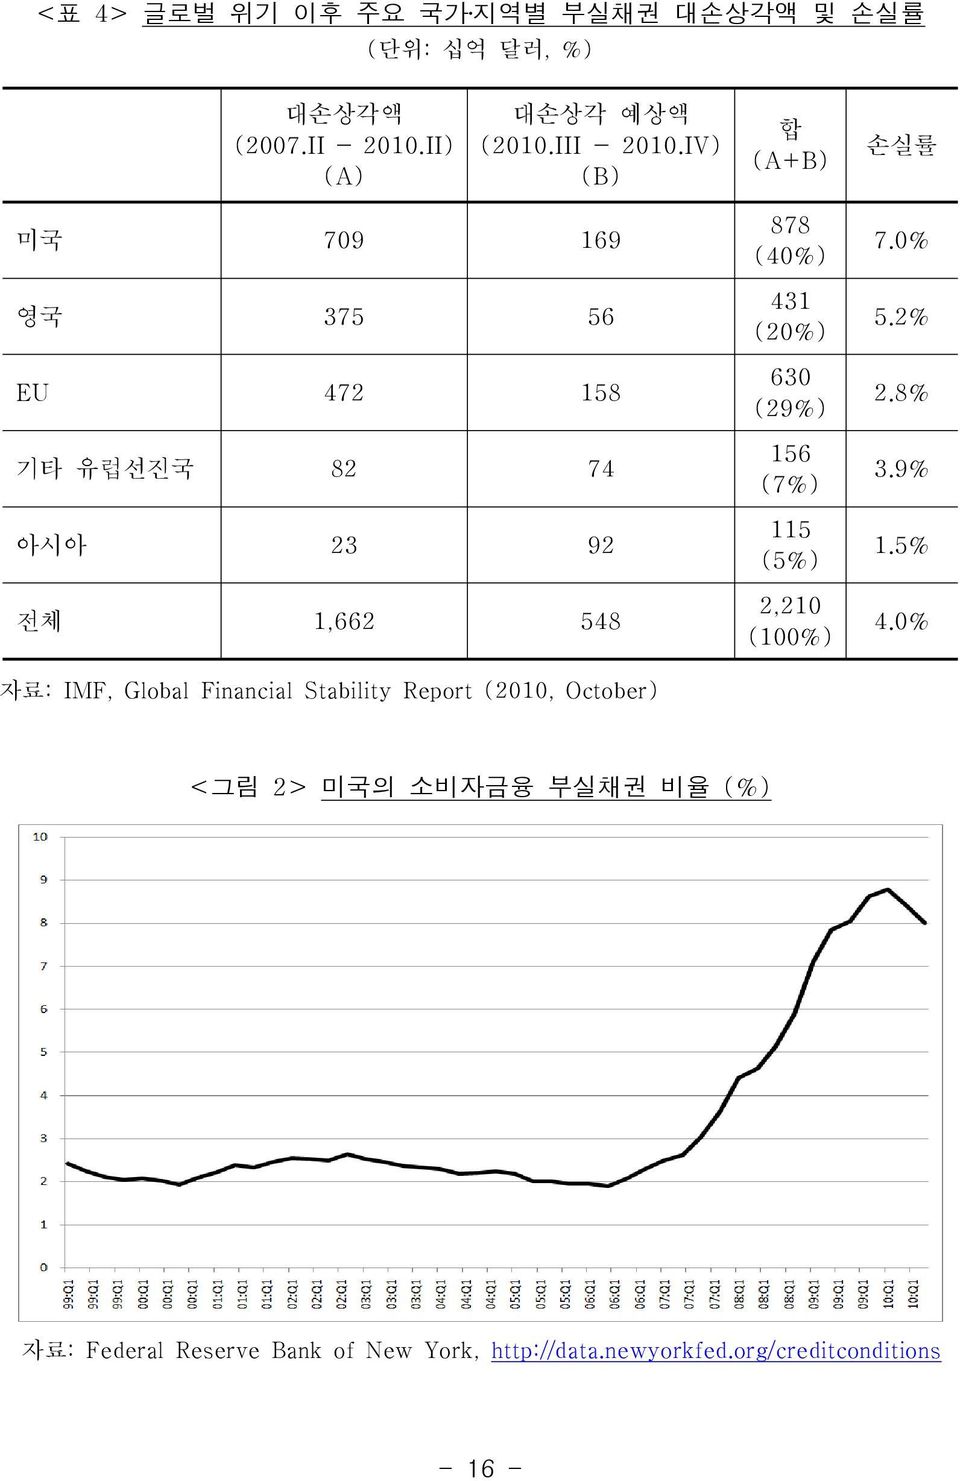 Stability Report (2010, October) 878 (40%) 431 (20%) 630 (29%) 156 (7%) 115 (5%) 2,210 (100%) 7.0% 5.2% 2.8% 3.9% 1.